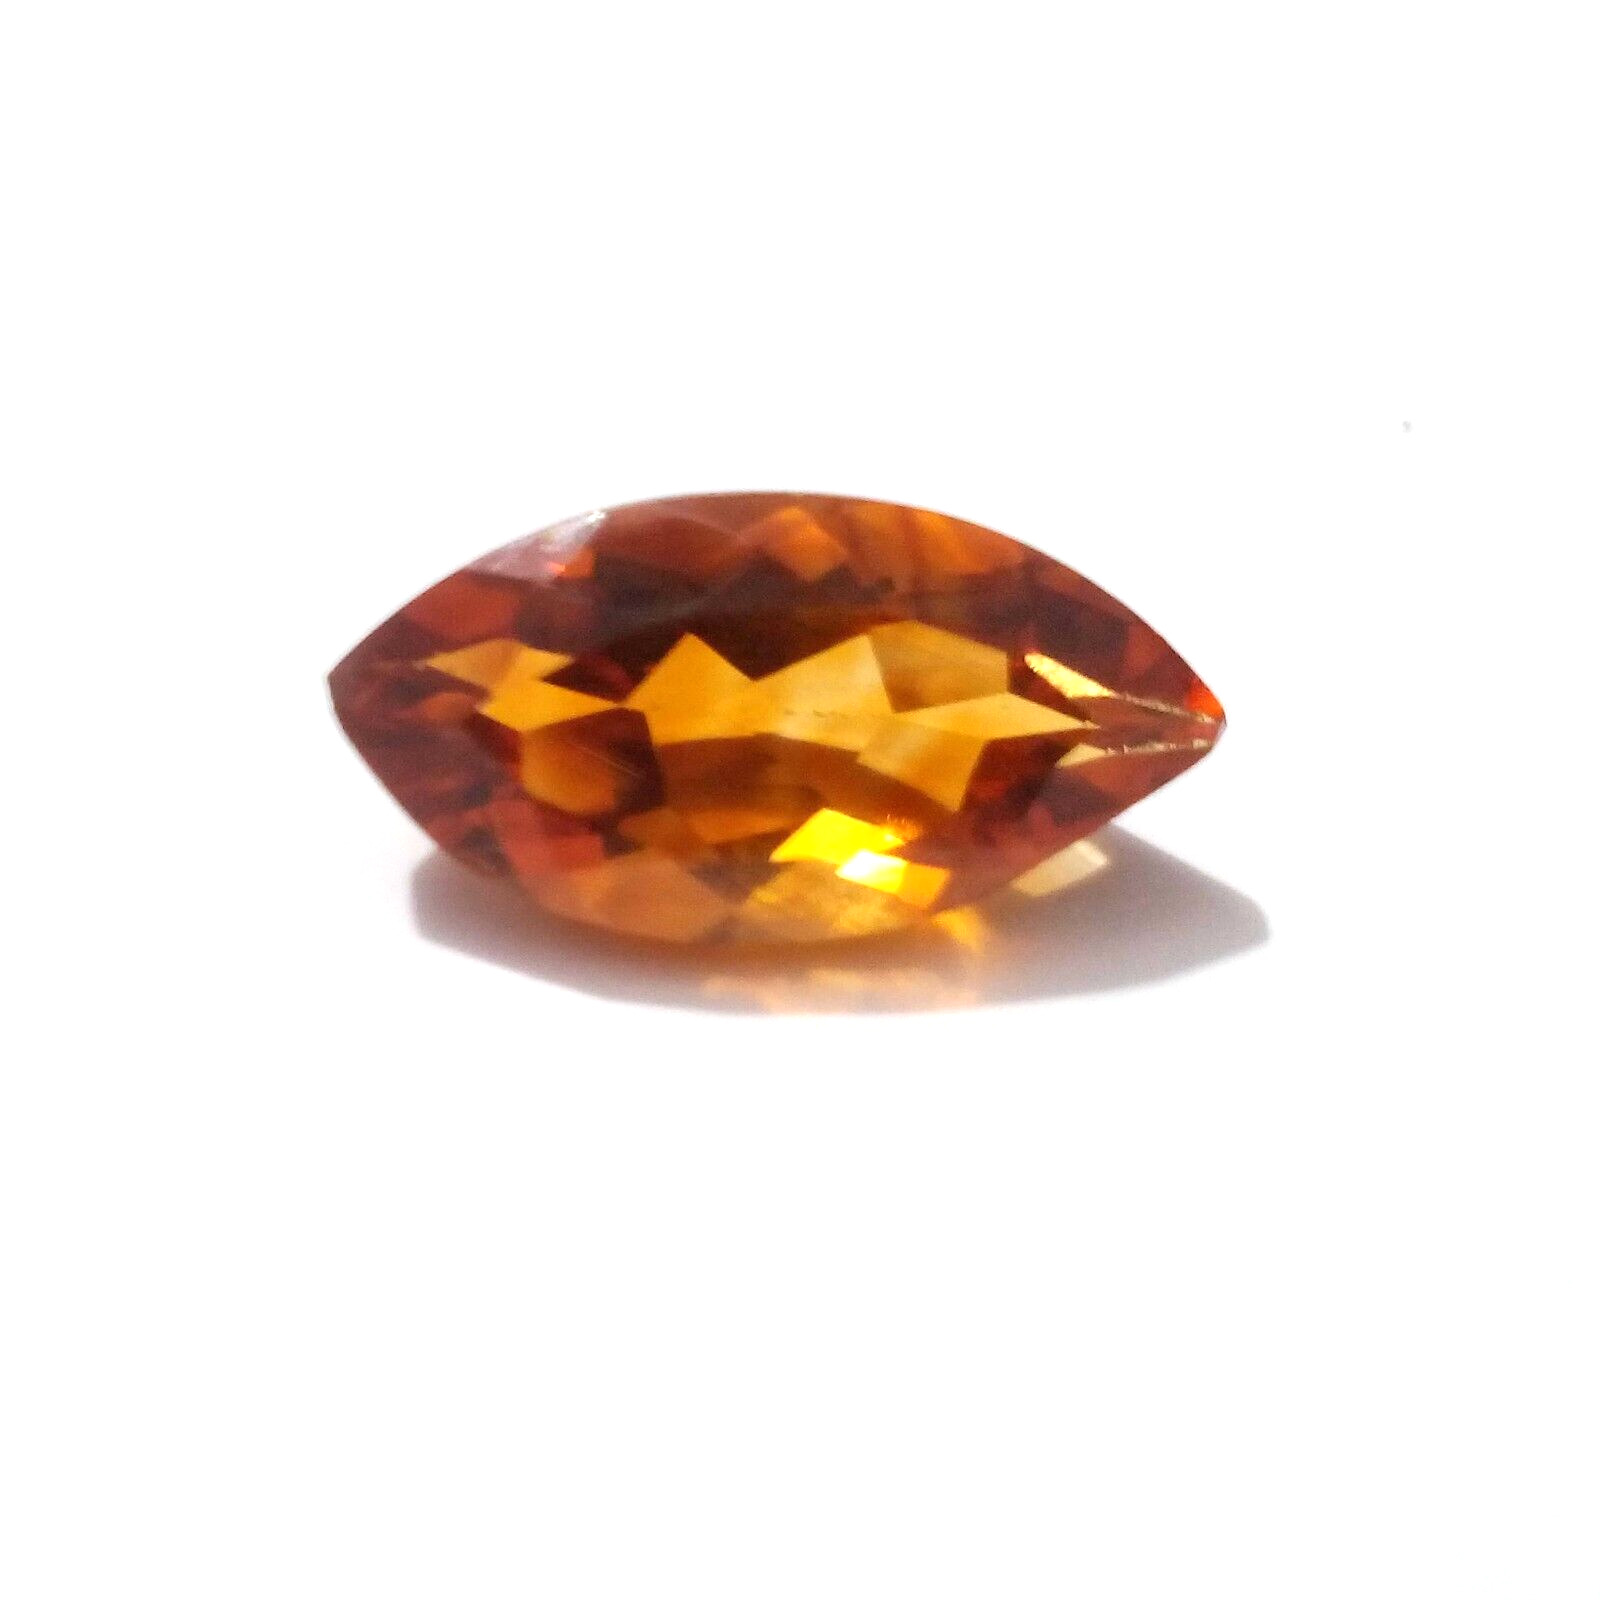 Outstanding Golden Citrine Topaz Marquise Shape 2.75 Crt Faceted Loose Gemstone